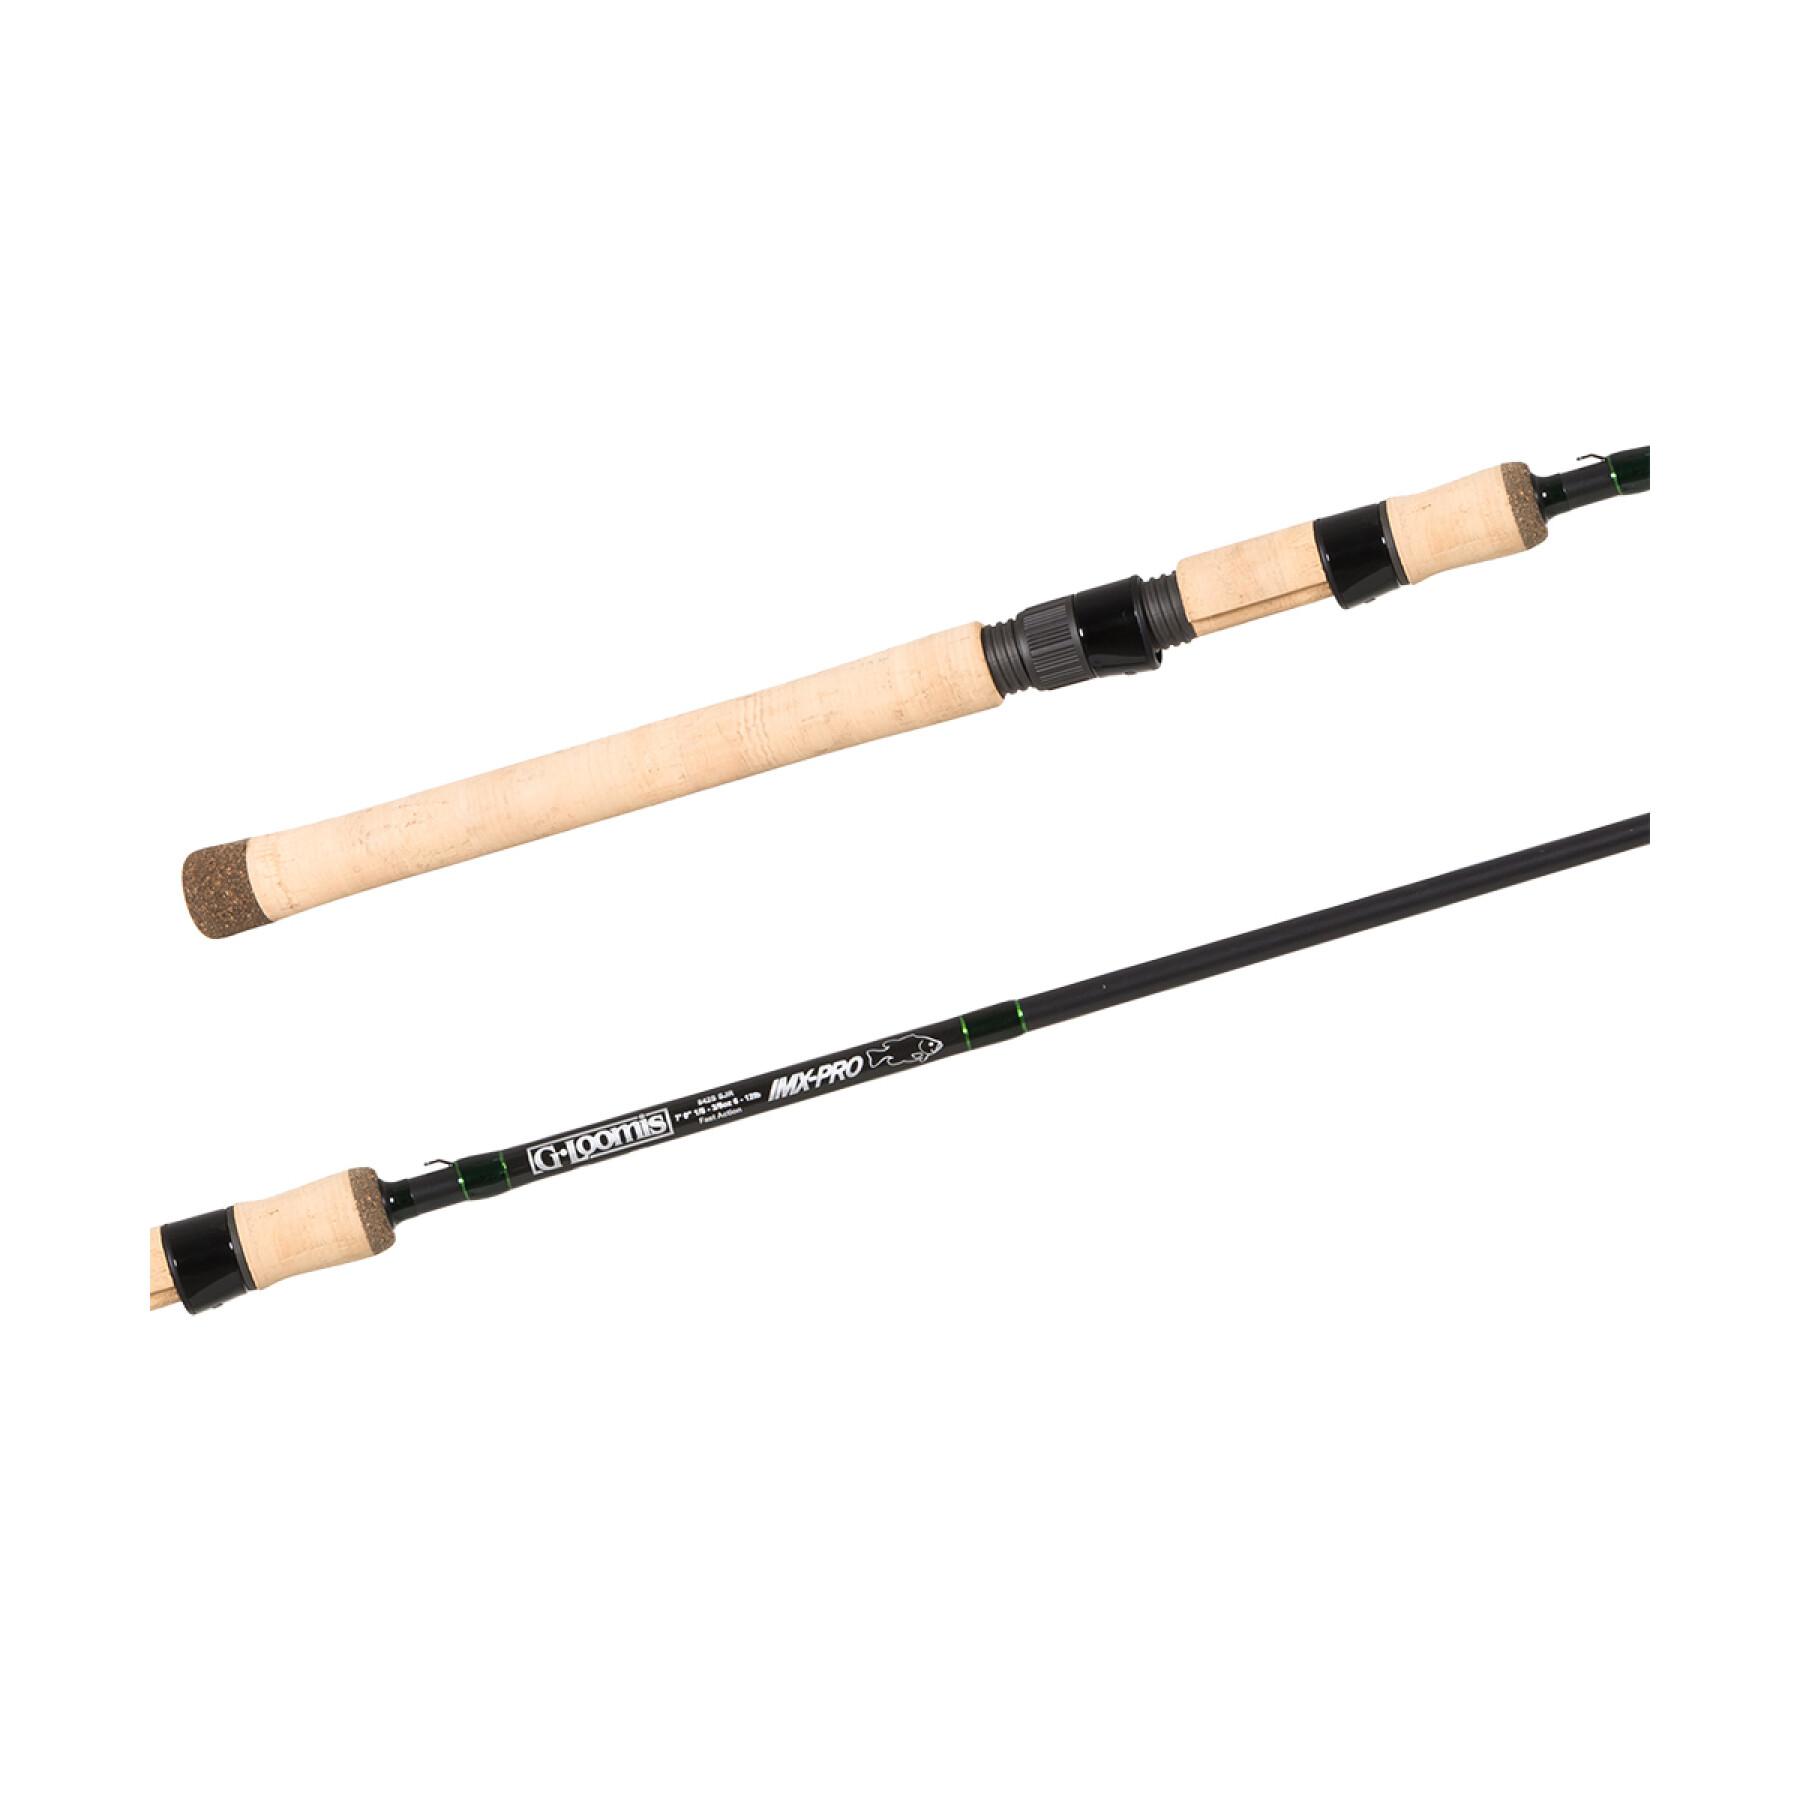 Spinning rods Shimano Gls Imx-Pro 782s